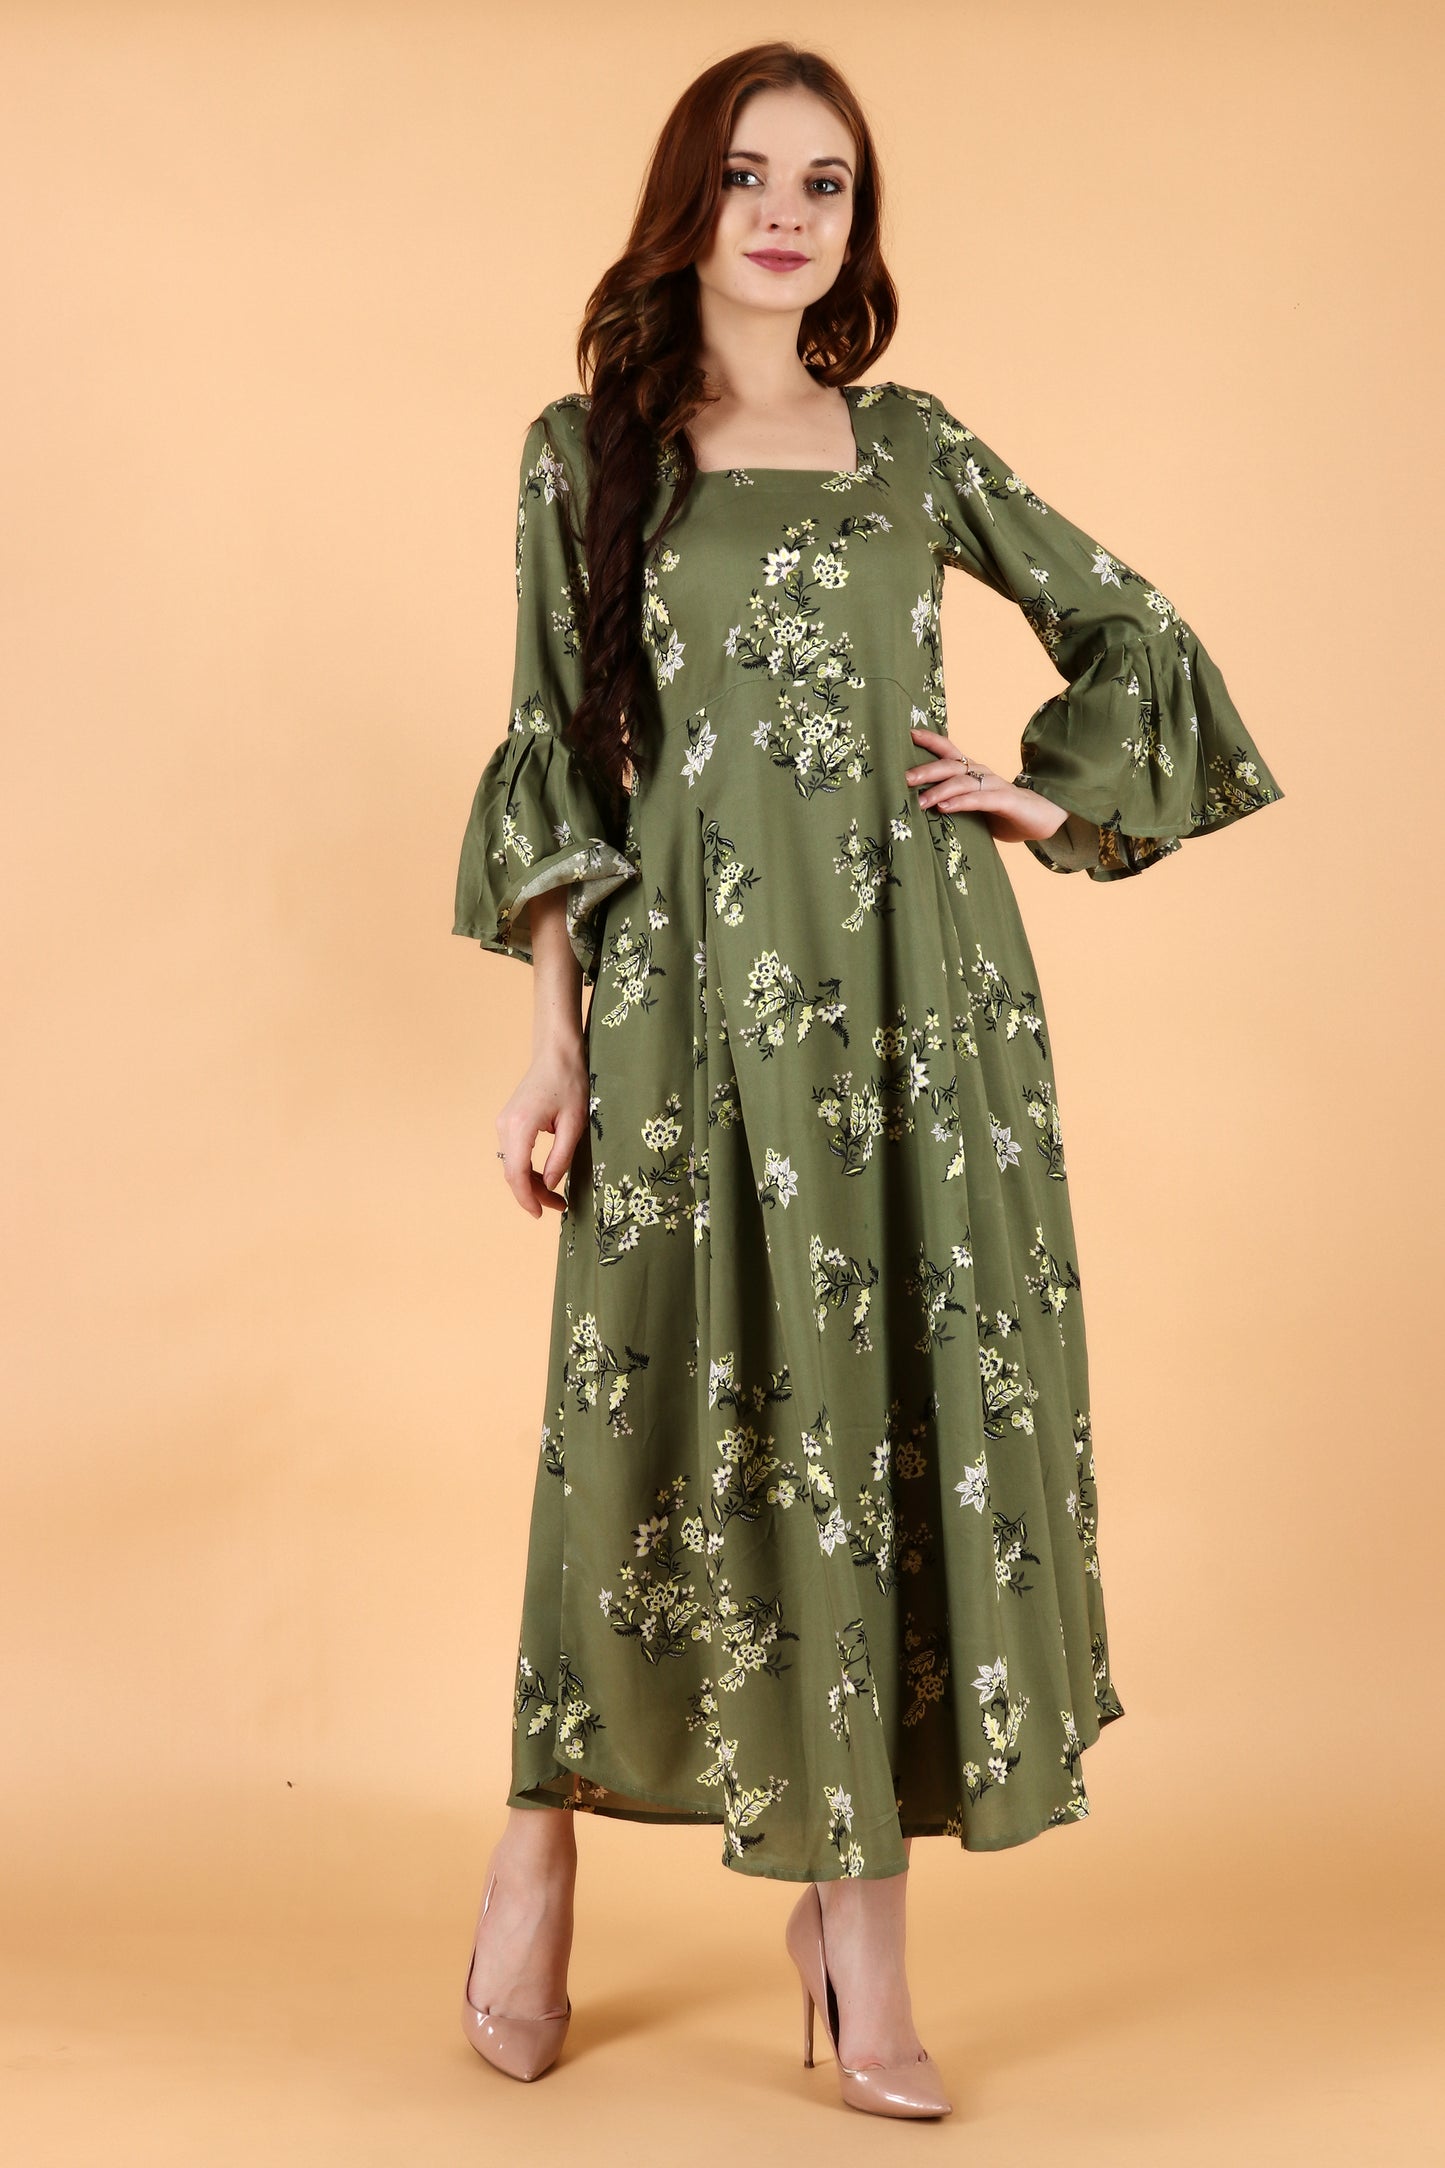 10xl, 2xl, 3xl, 4xl, 5xl, 6xl, 7xl, 8xl, 9xl, comfortable, flared, floral, frilled sleeves, olive green, peach, plus size dress, rayon, square neckline, summer wear